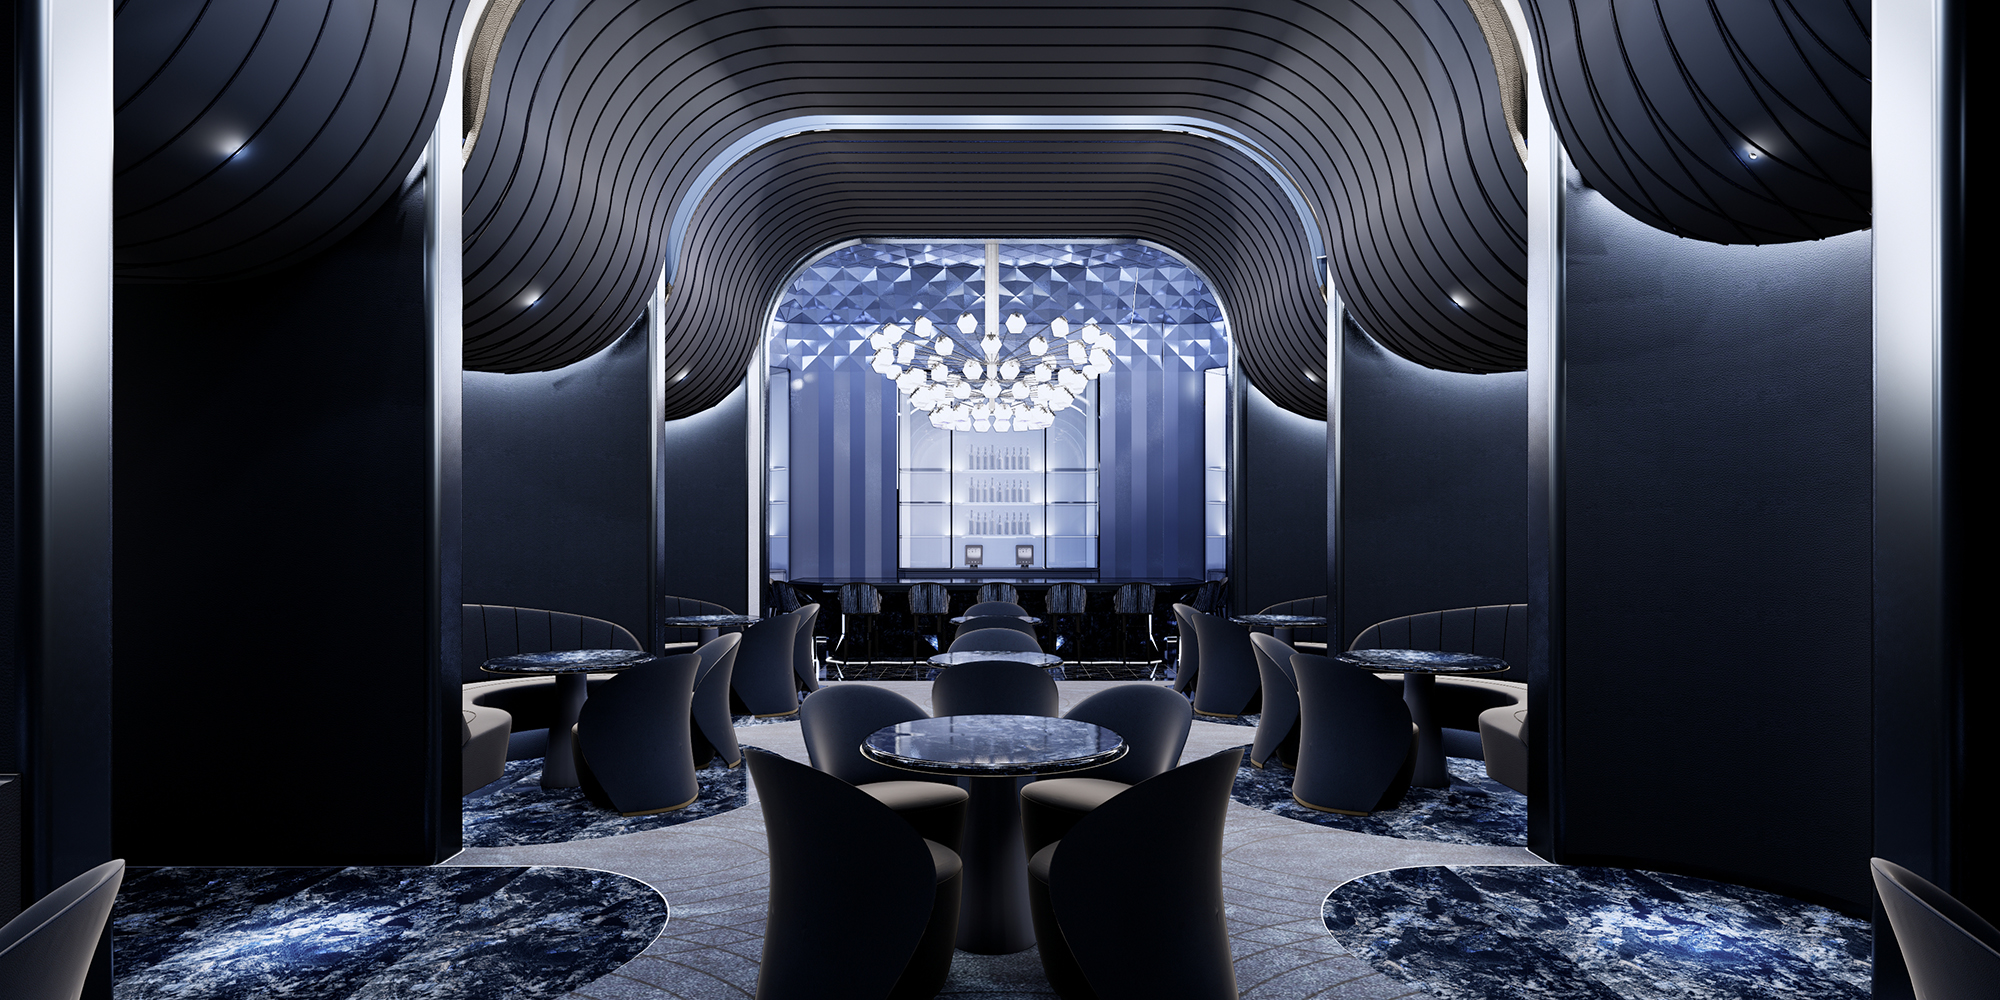 Modernizing and redefining the concept of a speakeasy, Studio Munge elevates the Bellagio Resort and Casino with crystalline glamour.